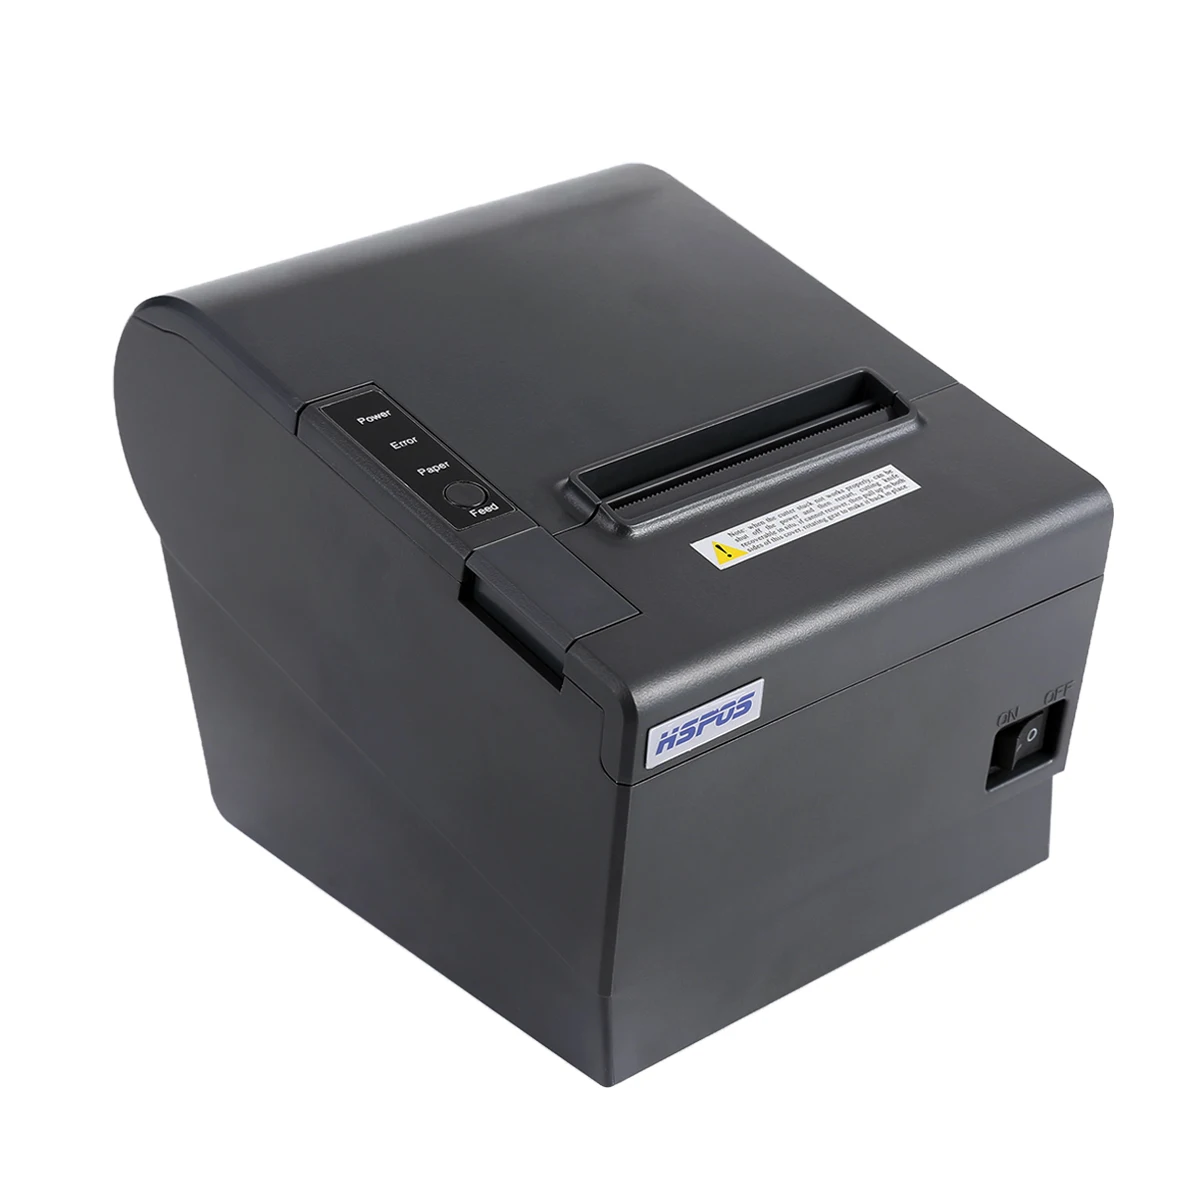 

80mm Thermal Receipt Printer with Auto cutter for retail POS systems with USB+LAN interface HS-802